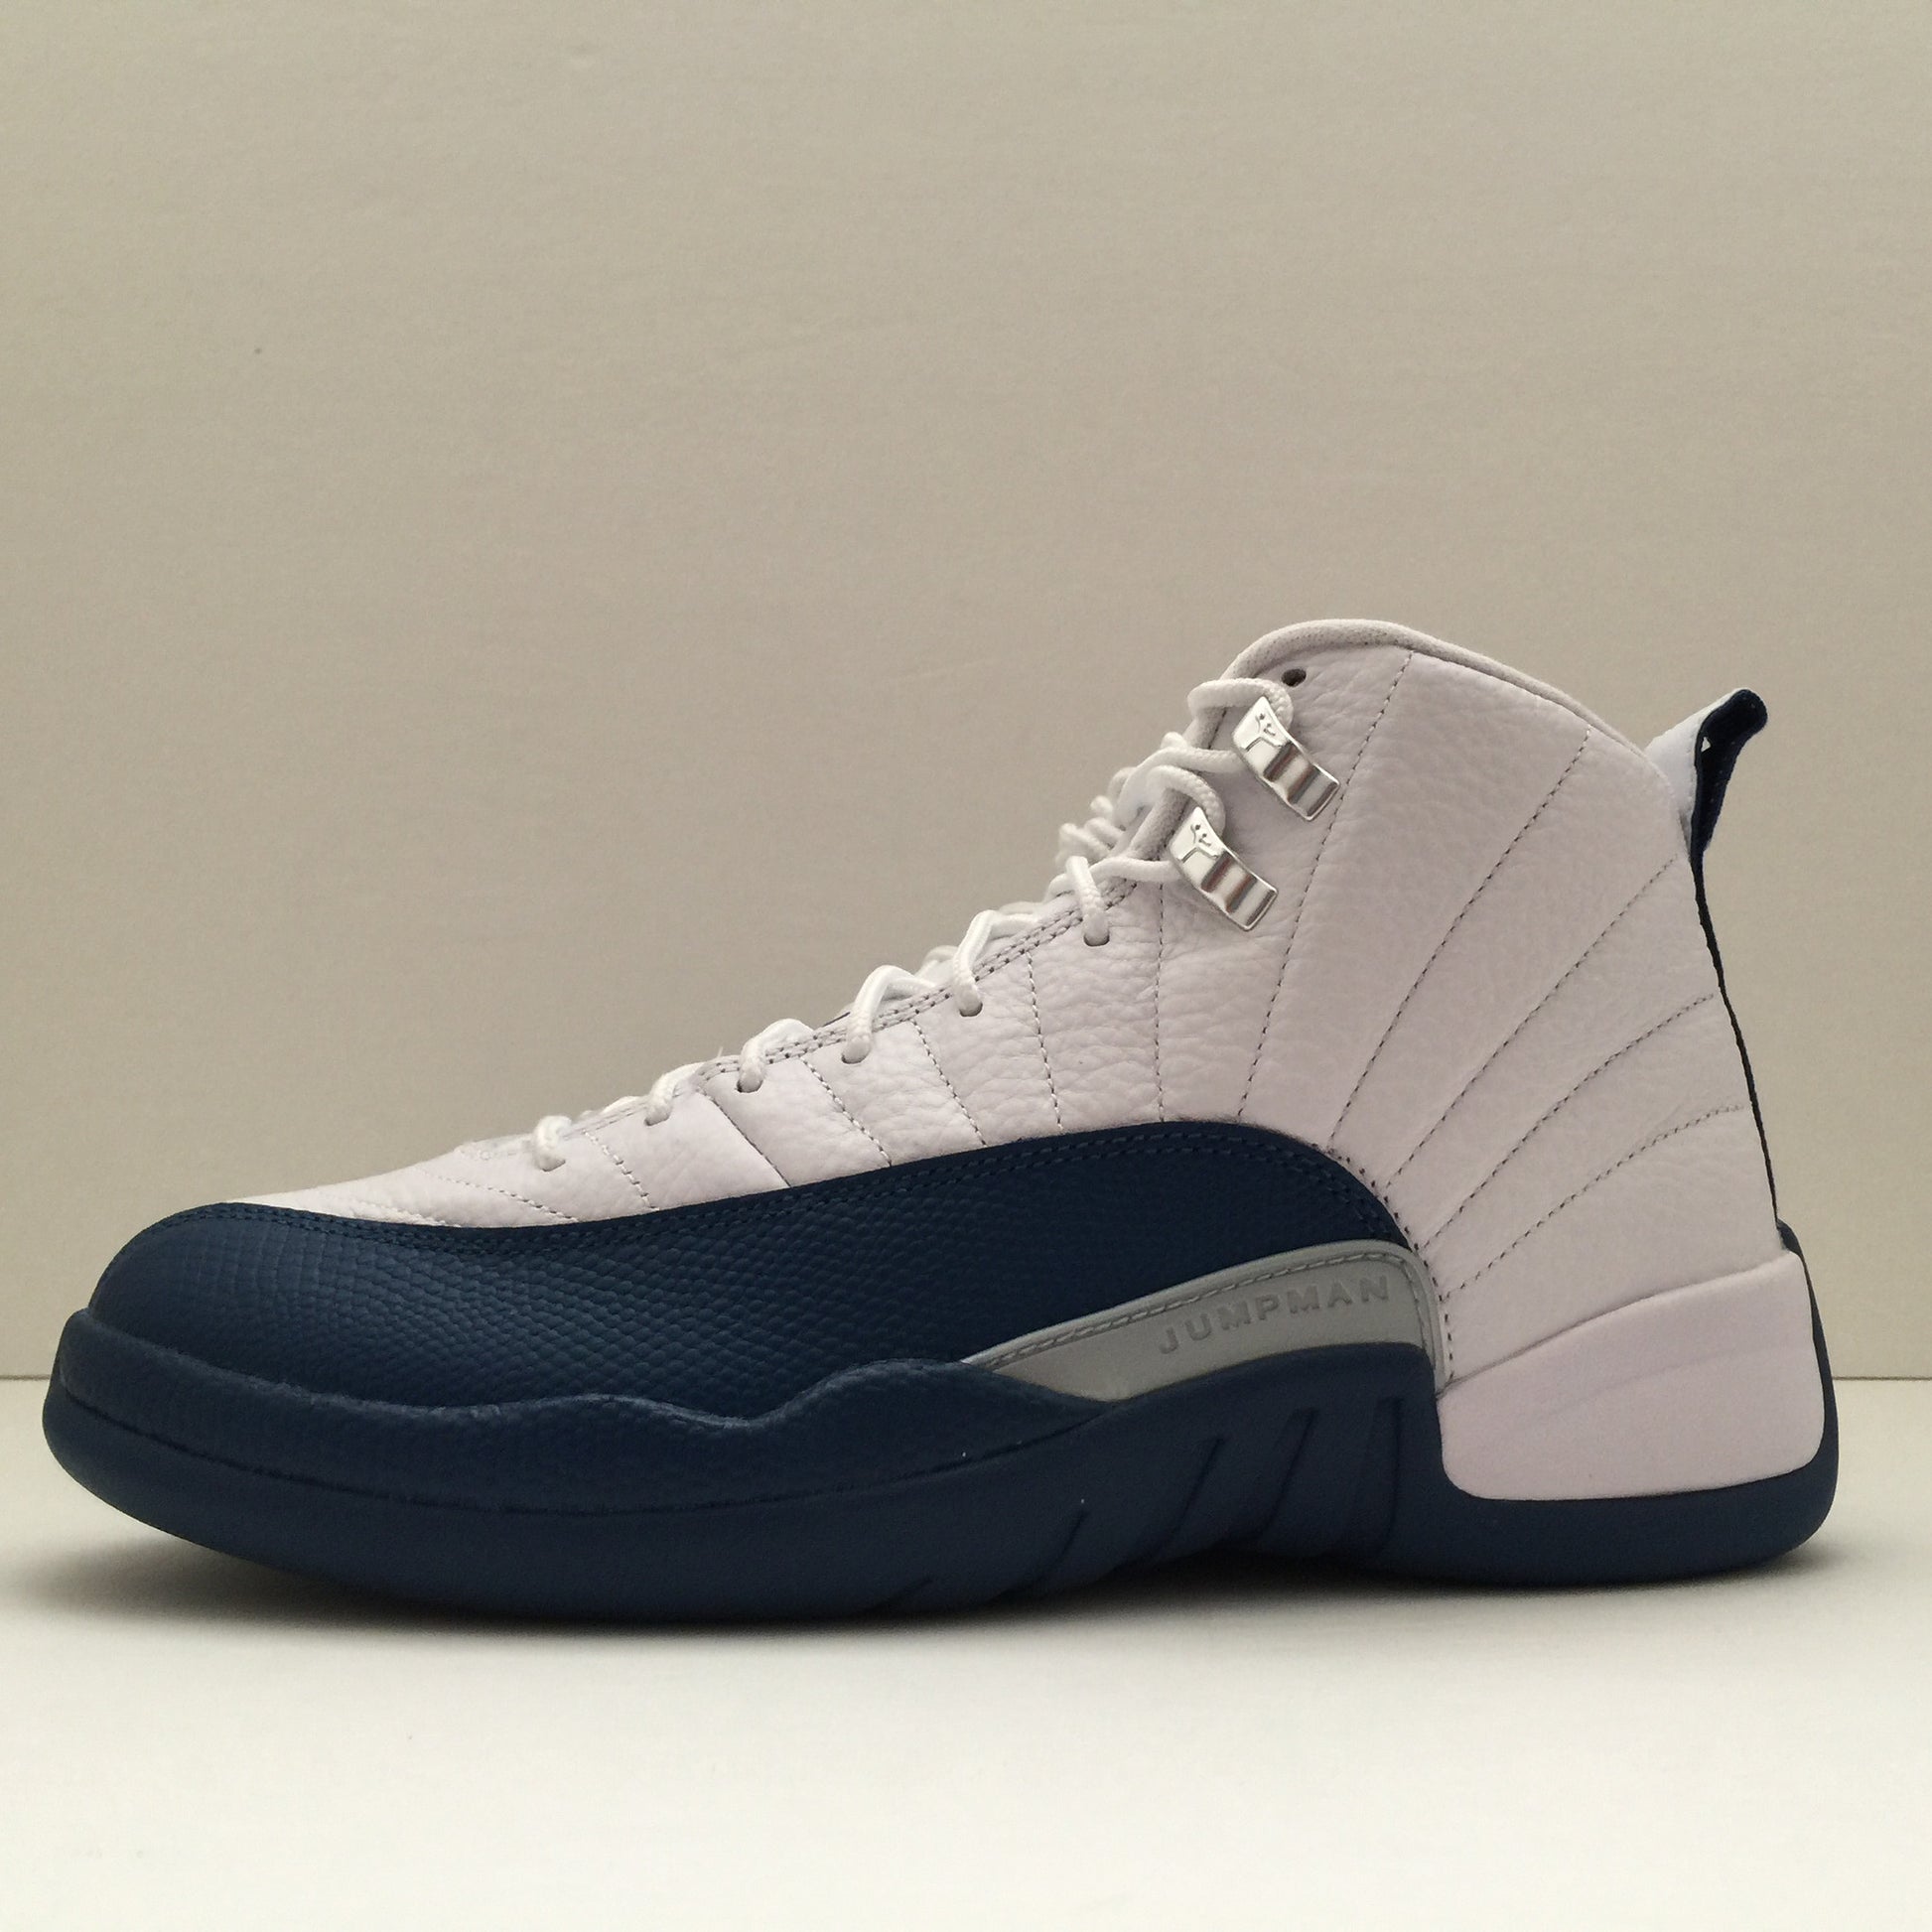 DS Nike Air Jordan 12 XII French Blue Size 8/Size 8.5/Size 10/Size 10.5 - DOPEFOOT
 - 4